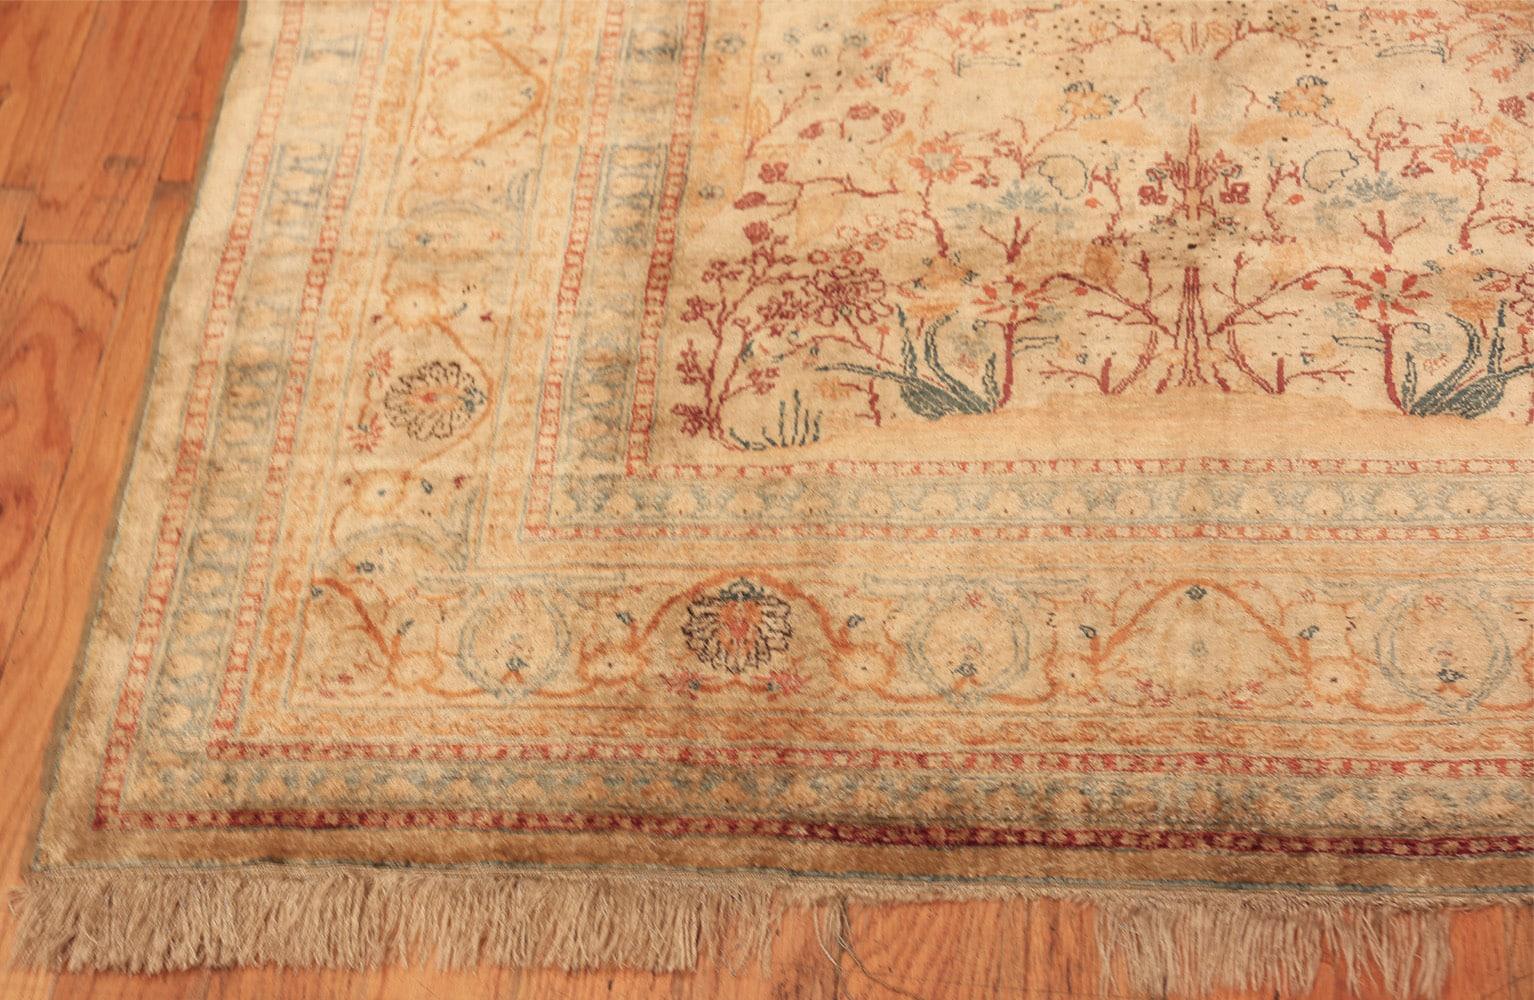 Beautiful small size antique Persian Tabriz silk prayer rug, country of origin: Persia, date: circa 1880, size: 4 ft 3 in x 5 ft 6 in (1.3 m x 1.68 m).